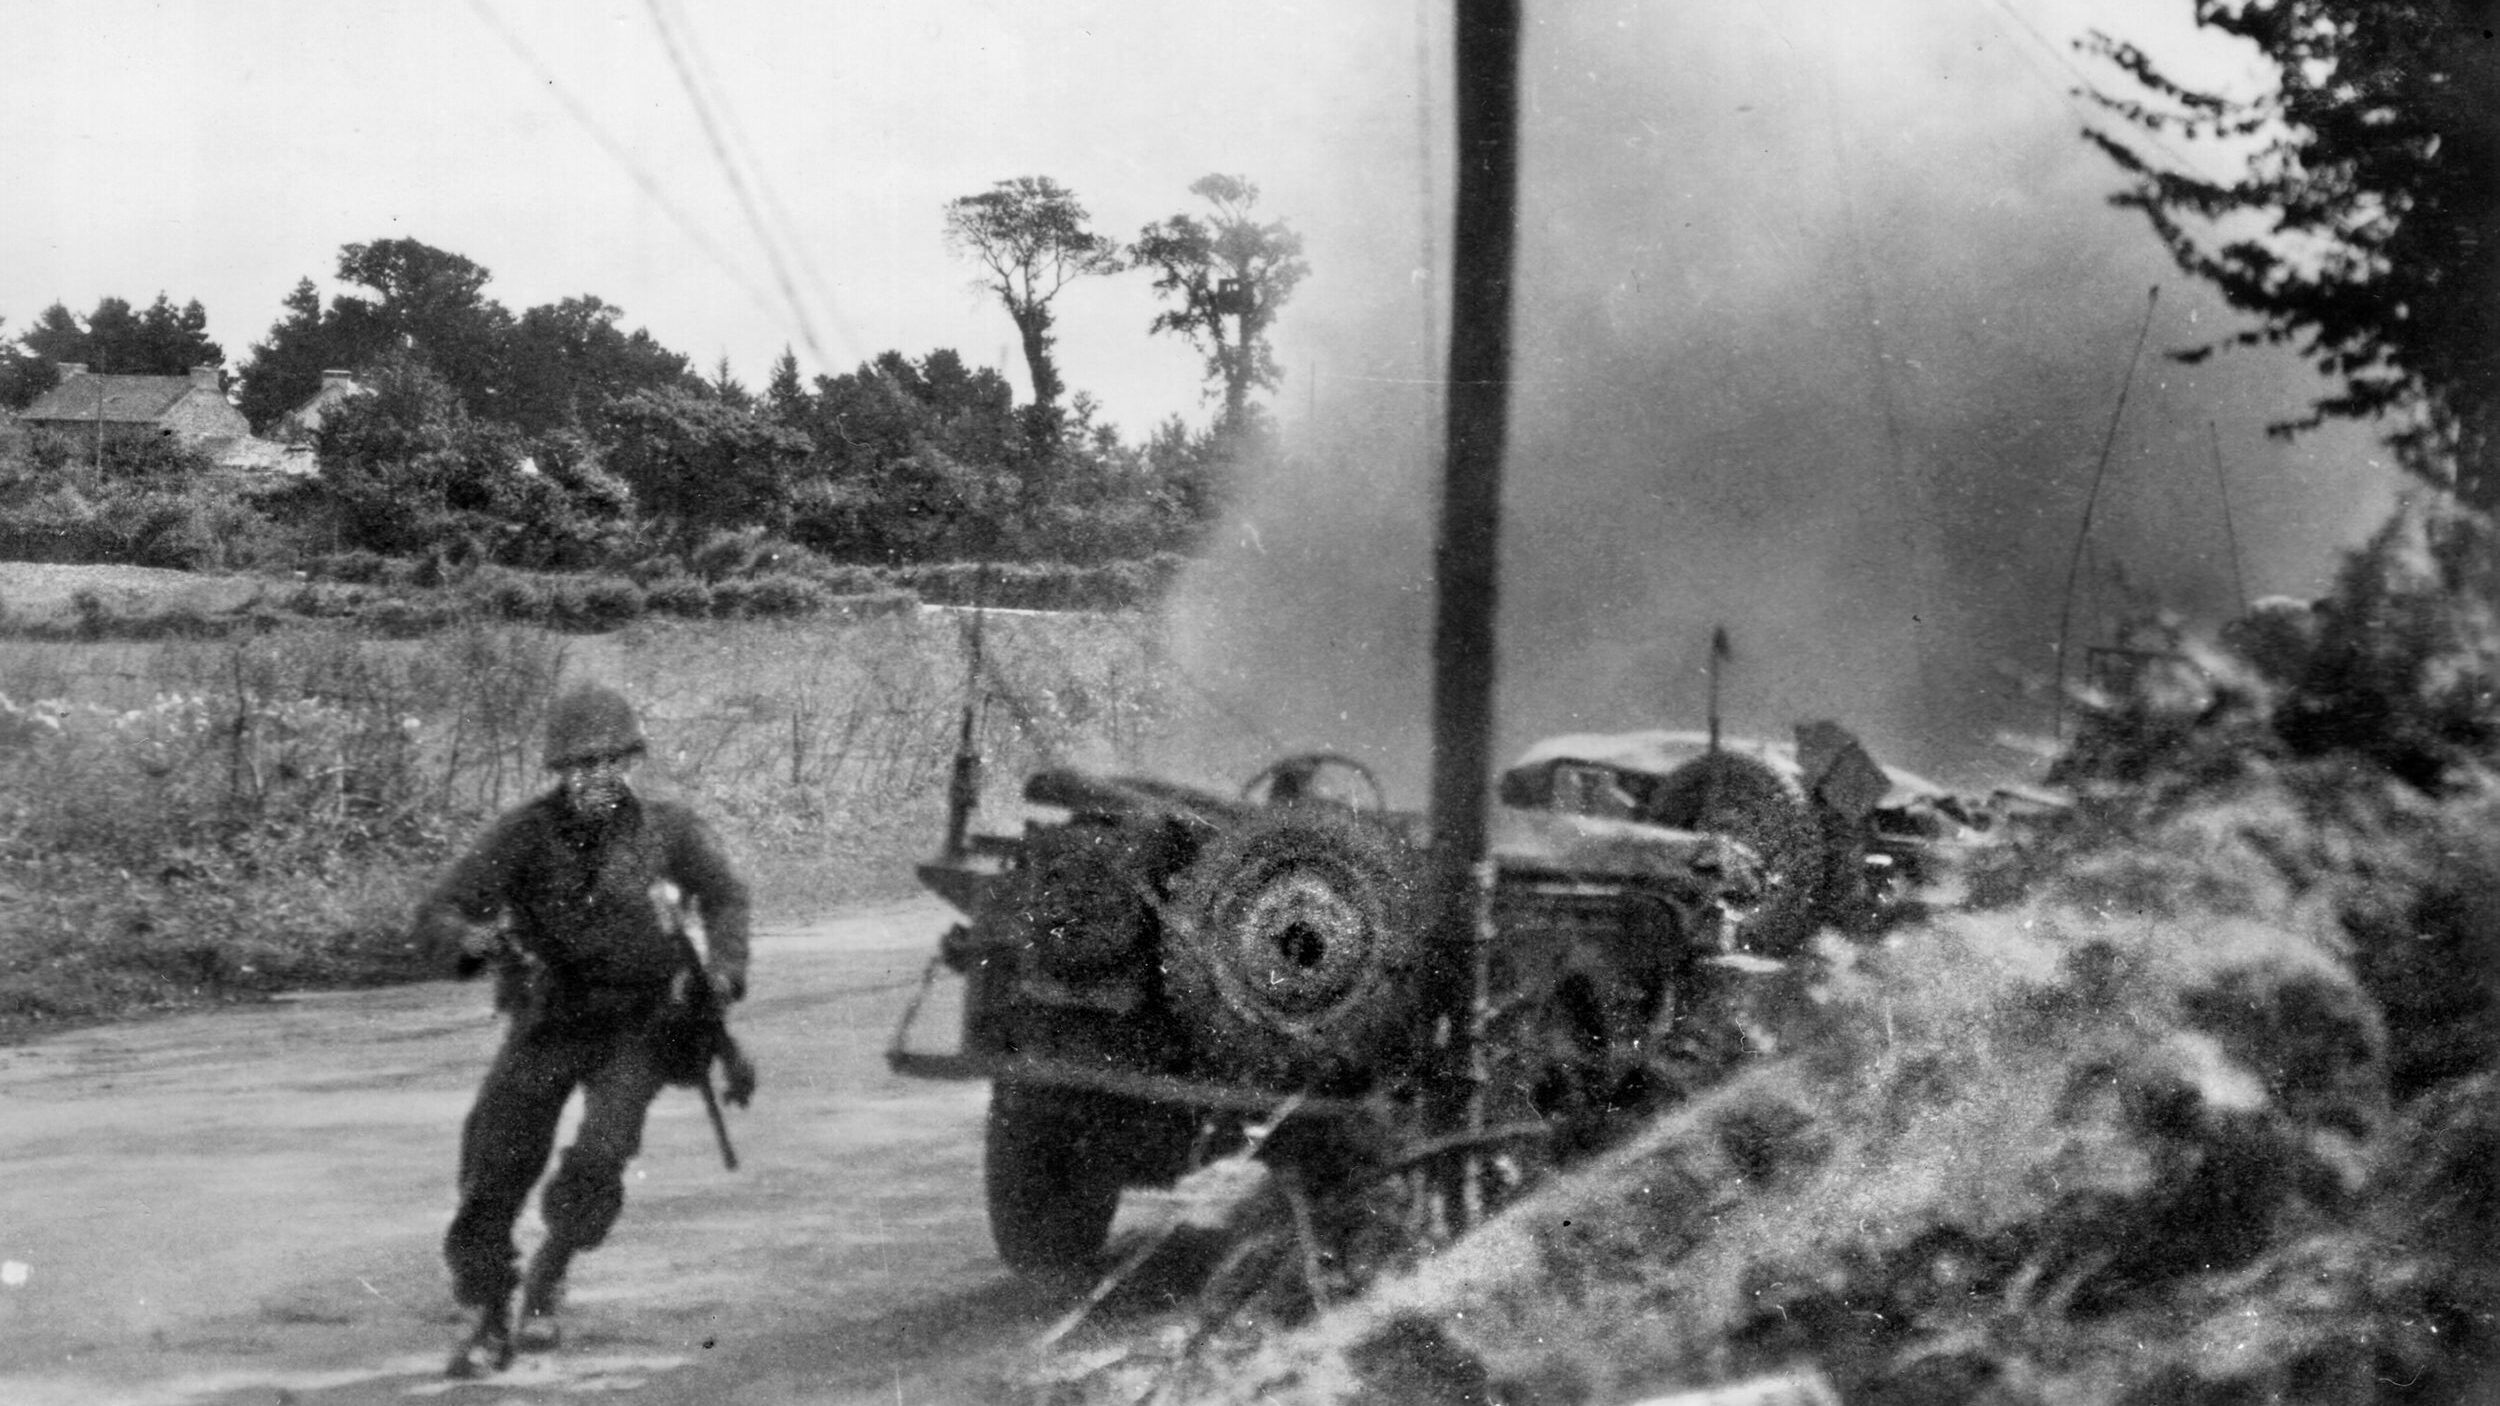 American infantrymen cautiously approach a burning German Tiger I that they have just knocked out of action in the fighting around Mortain. After the battle, the surviving German forces retreated towards Falaise where many would meet destruction.